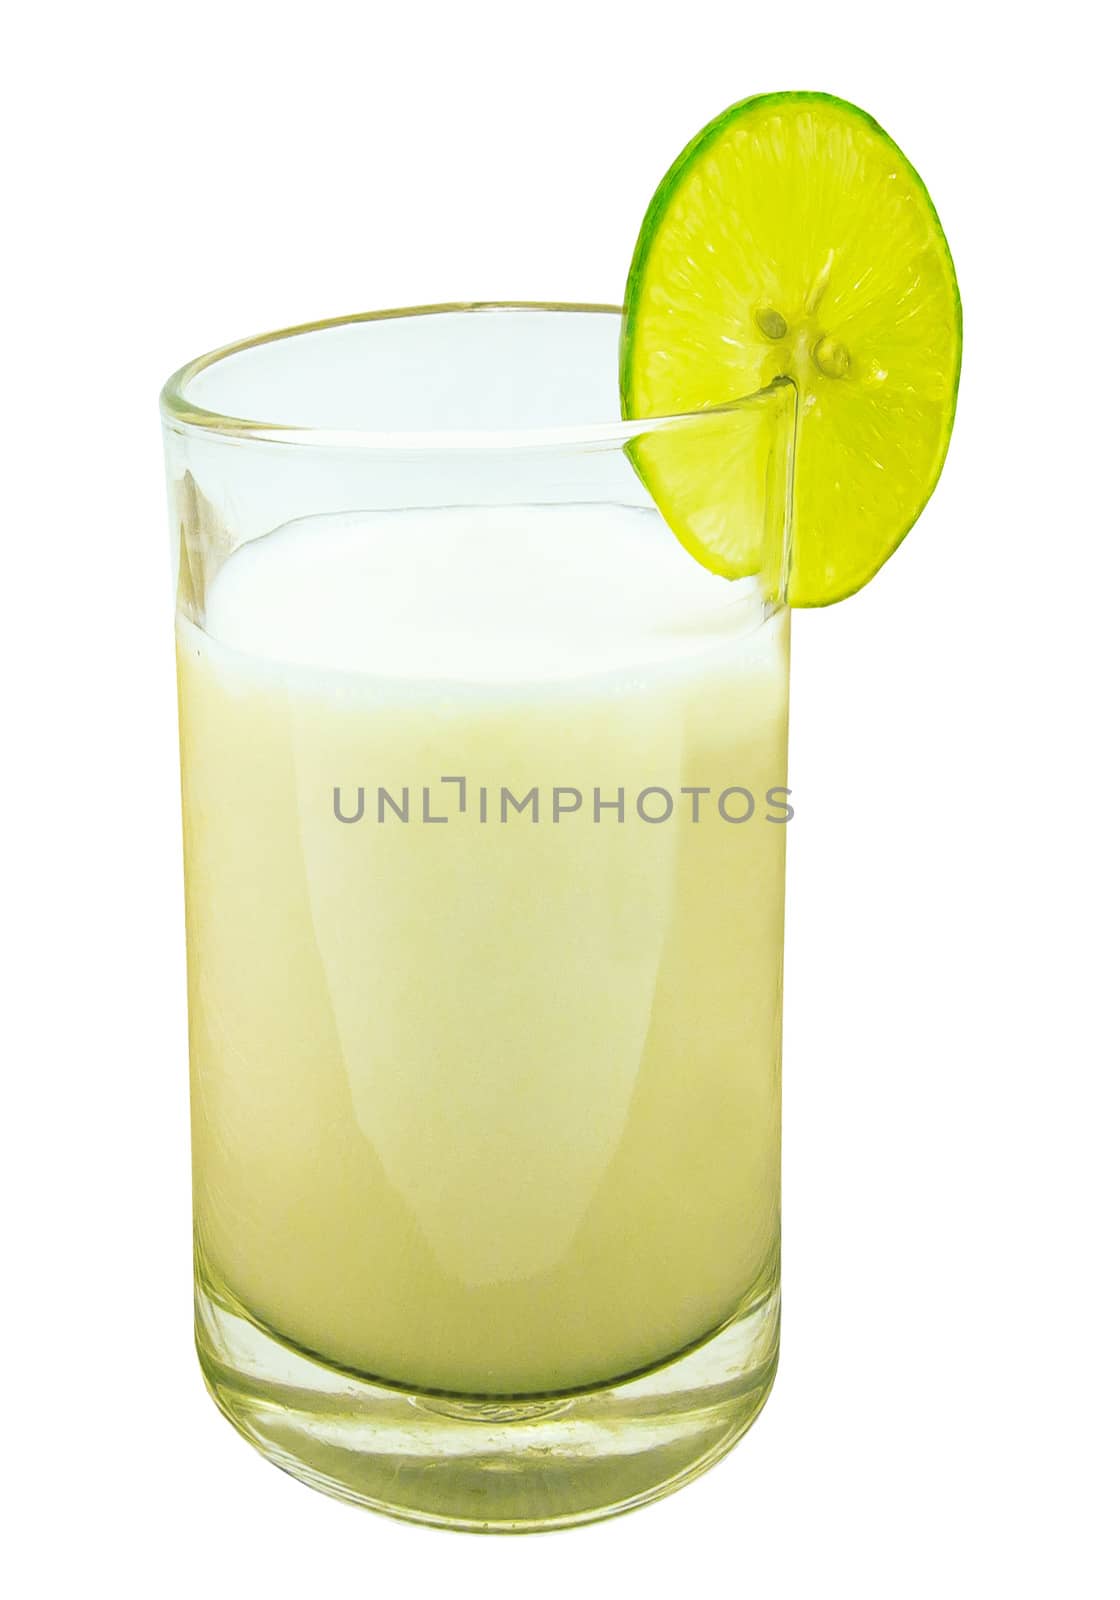 Milk and lemon slice on a white background by sutipp11